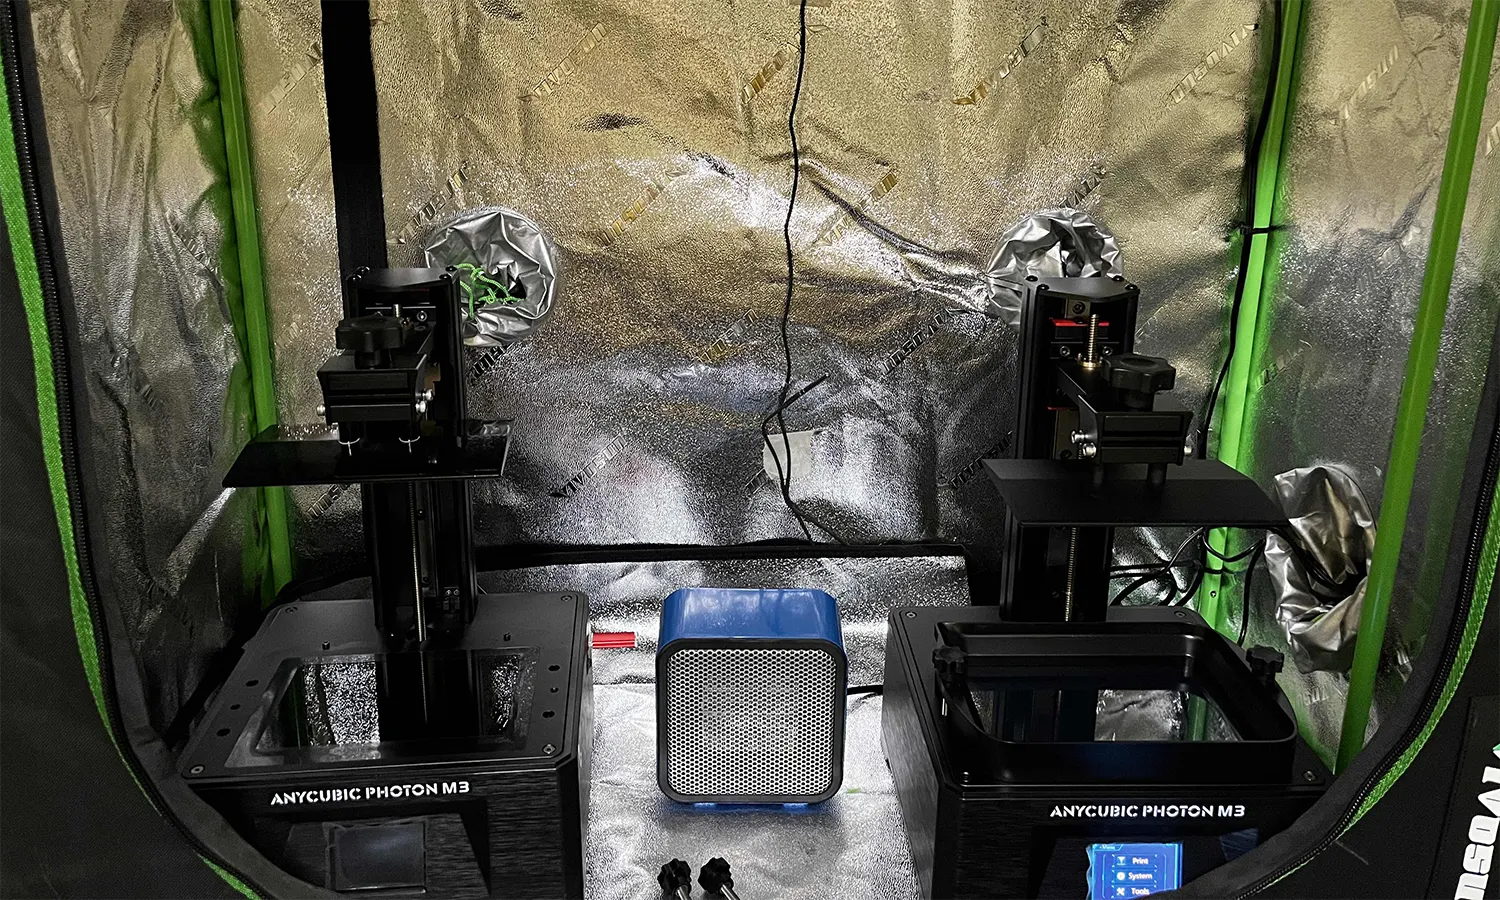 Example resin setup by 4D Filtration with a grow tent with a heater and two resin printers